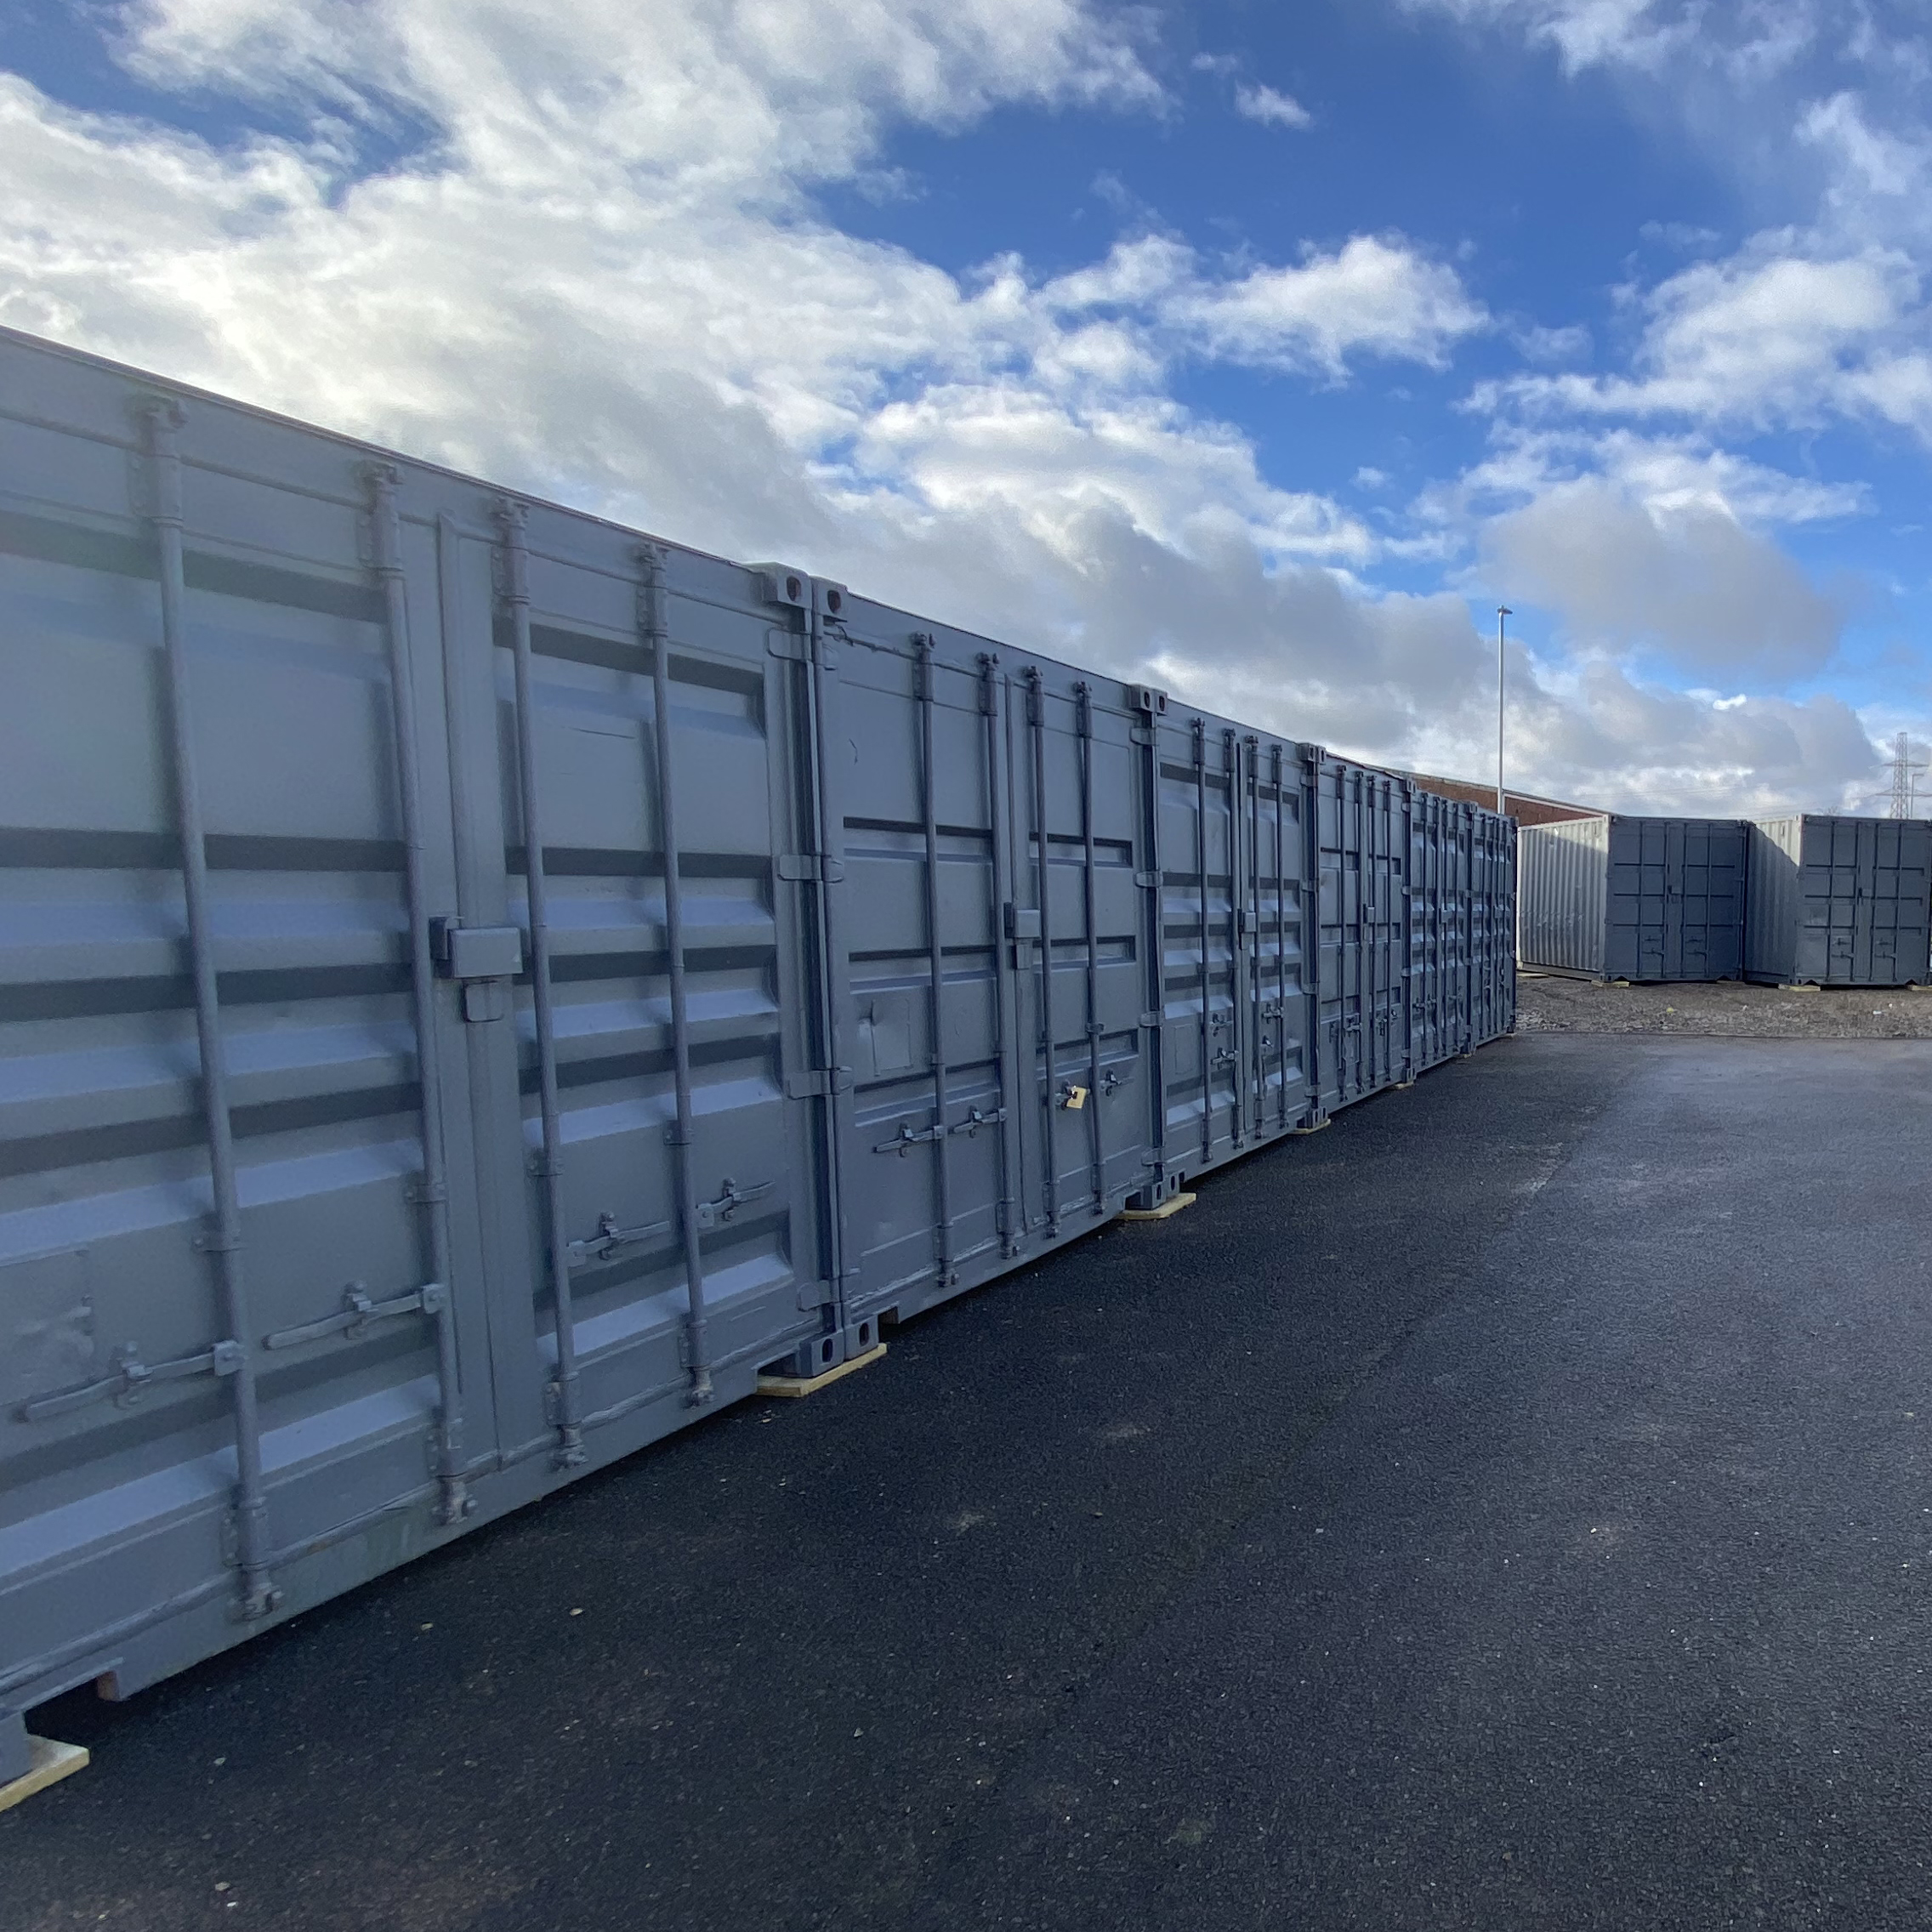 Top Box Self Storage  Container Storage In Scotland Top Box Self Storage